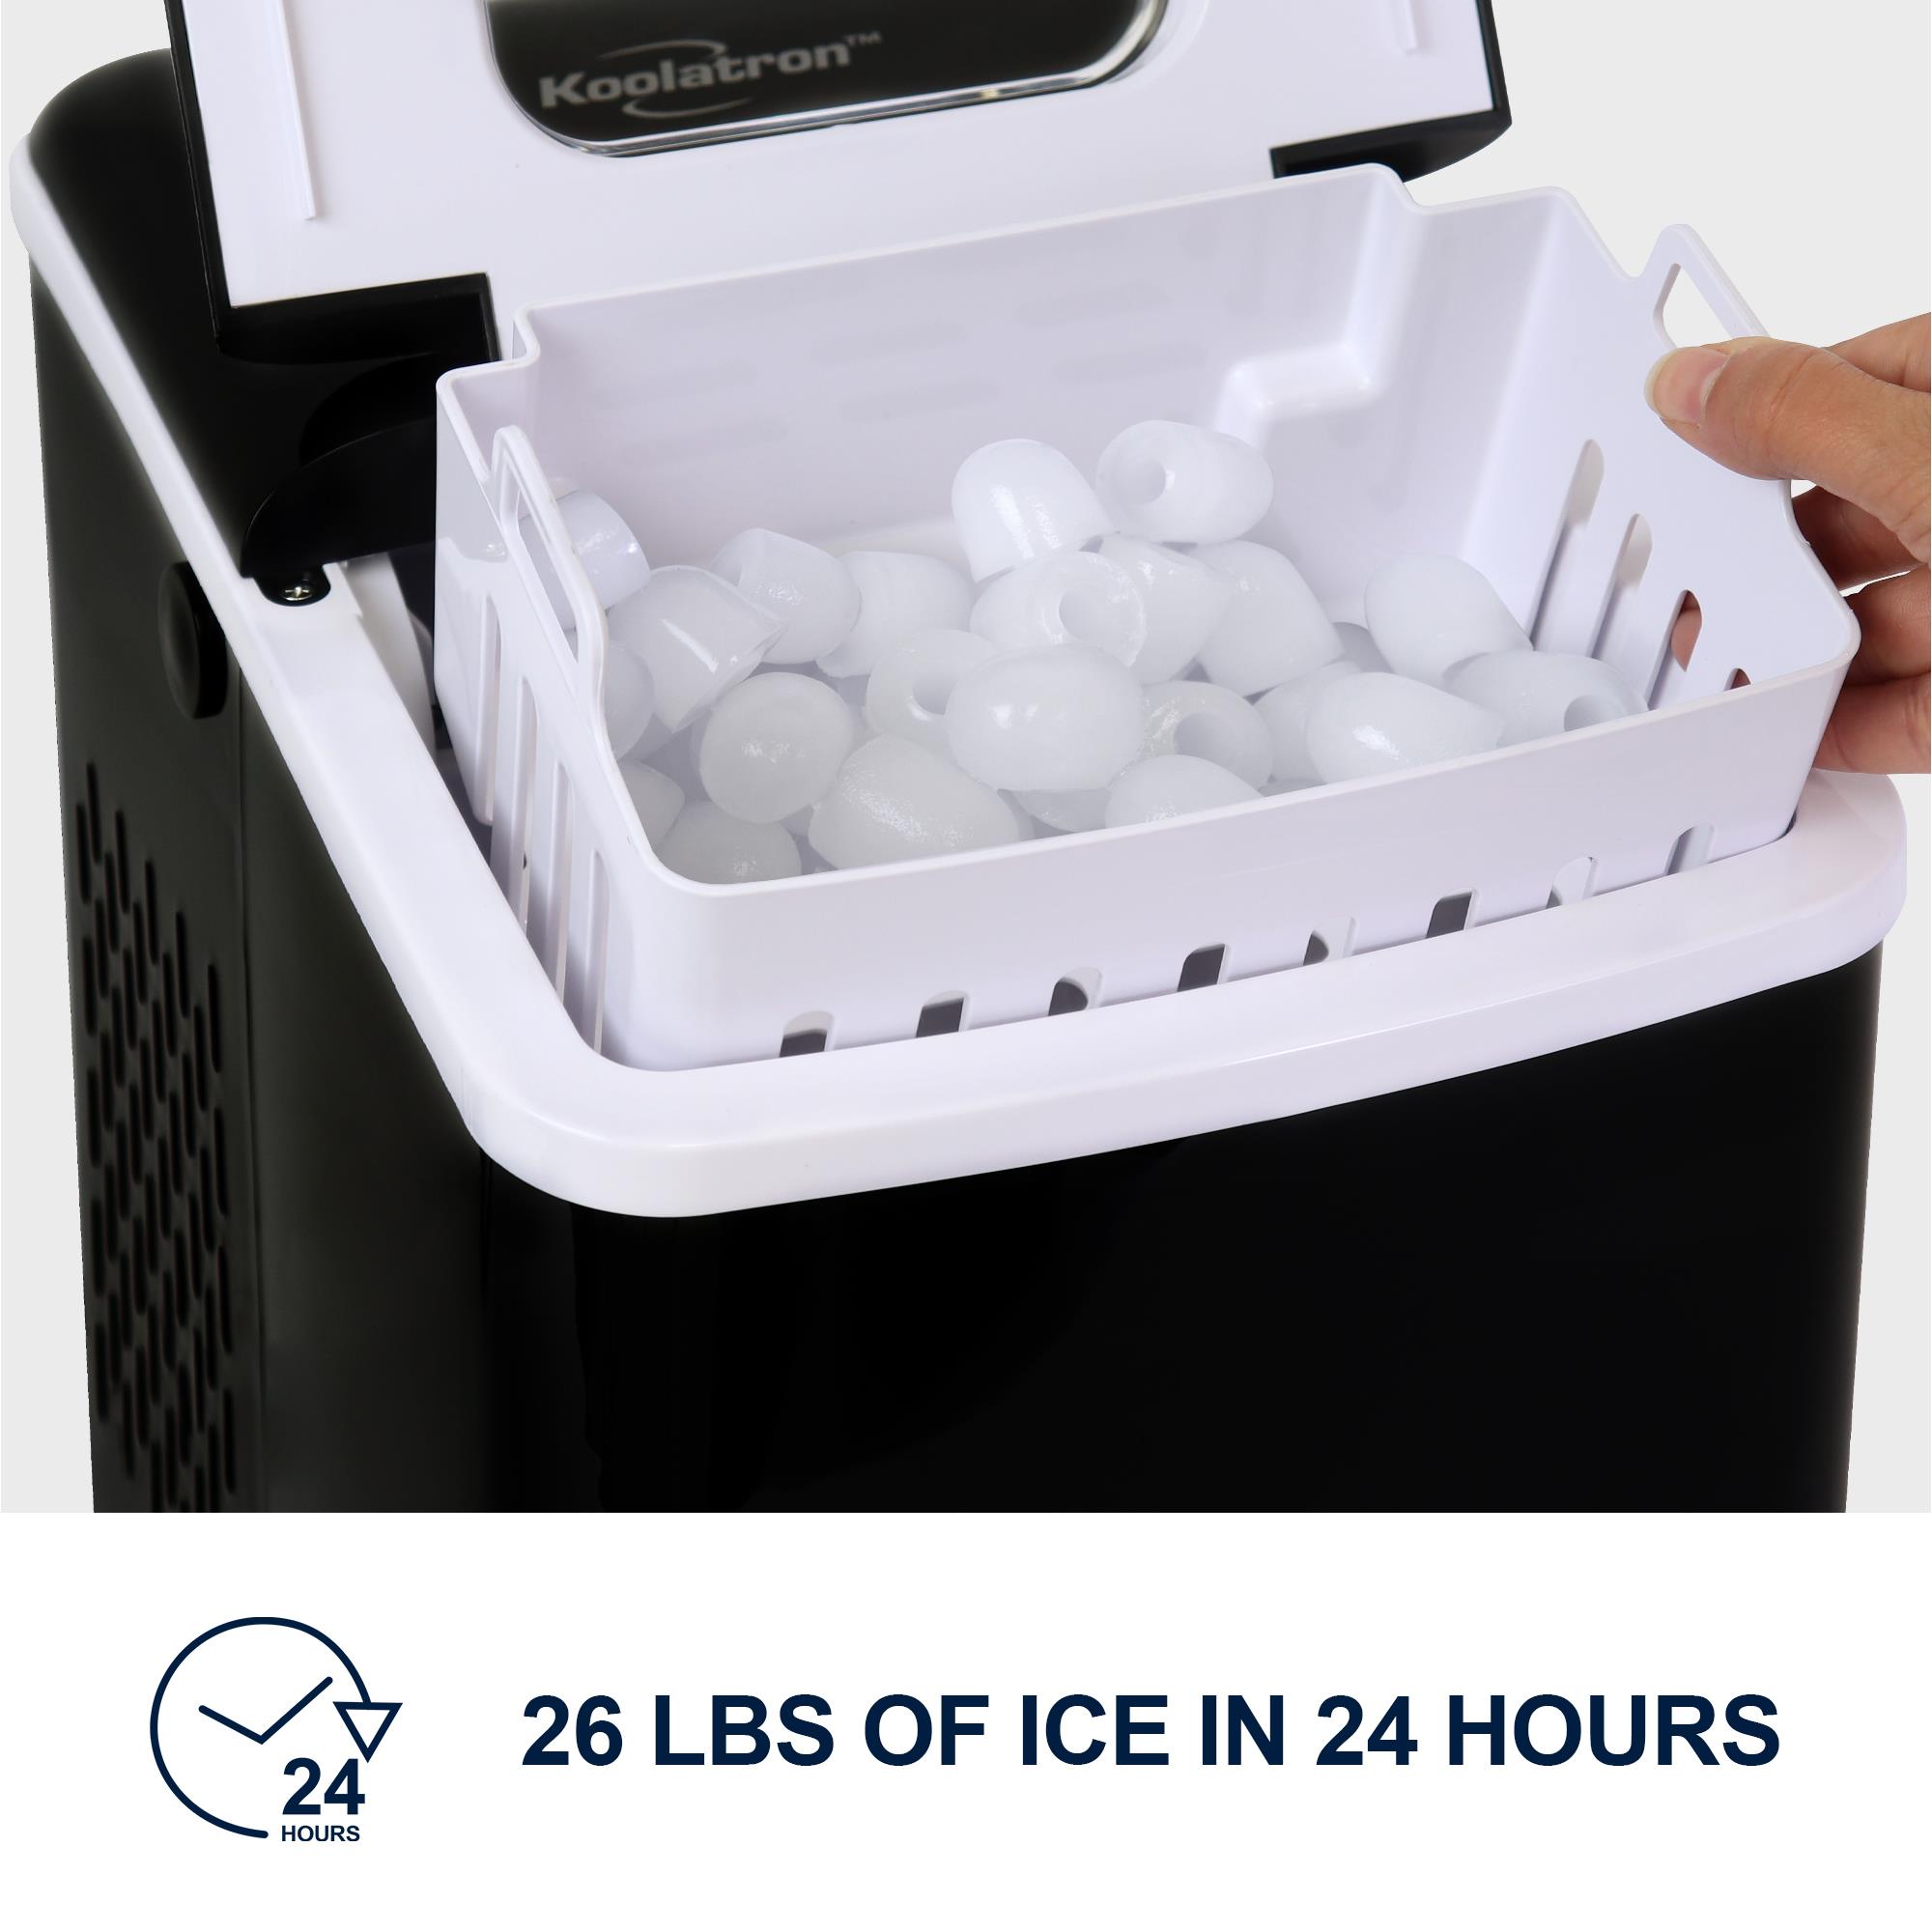 Igloo ICEB33BS Automatic Electric Countertop 33 LB Ice Maker, Black  Stainless